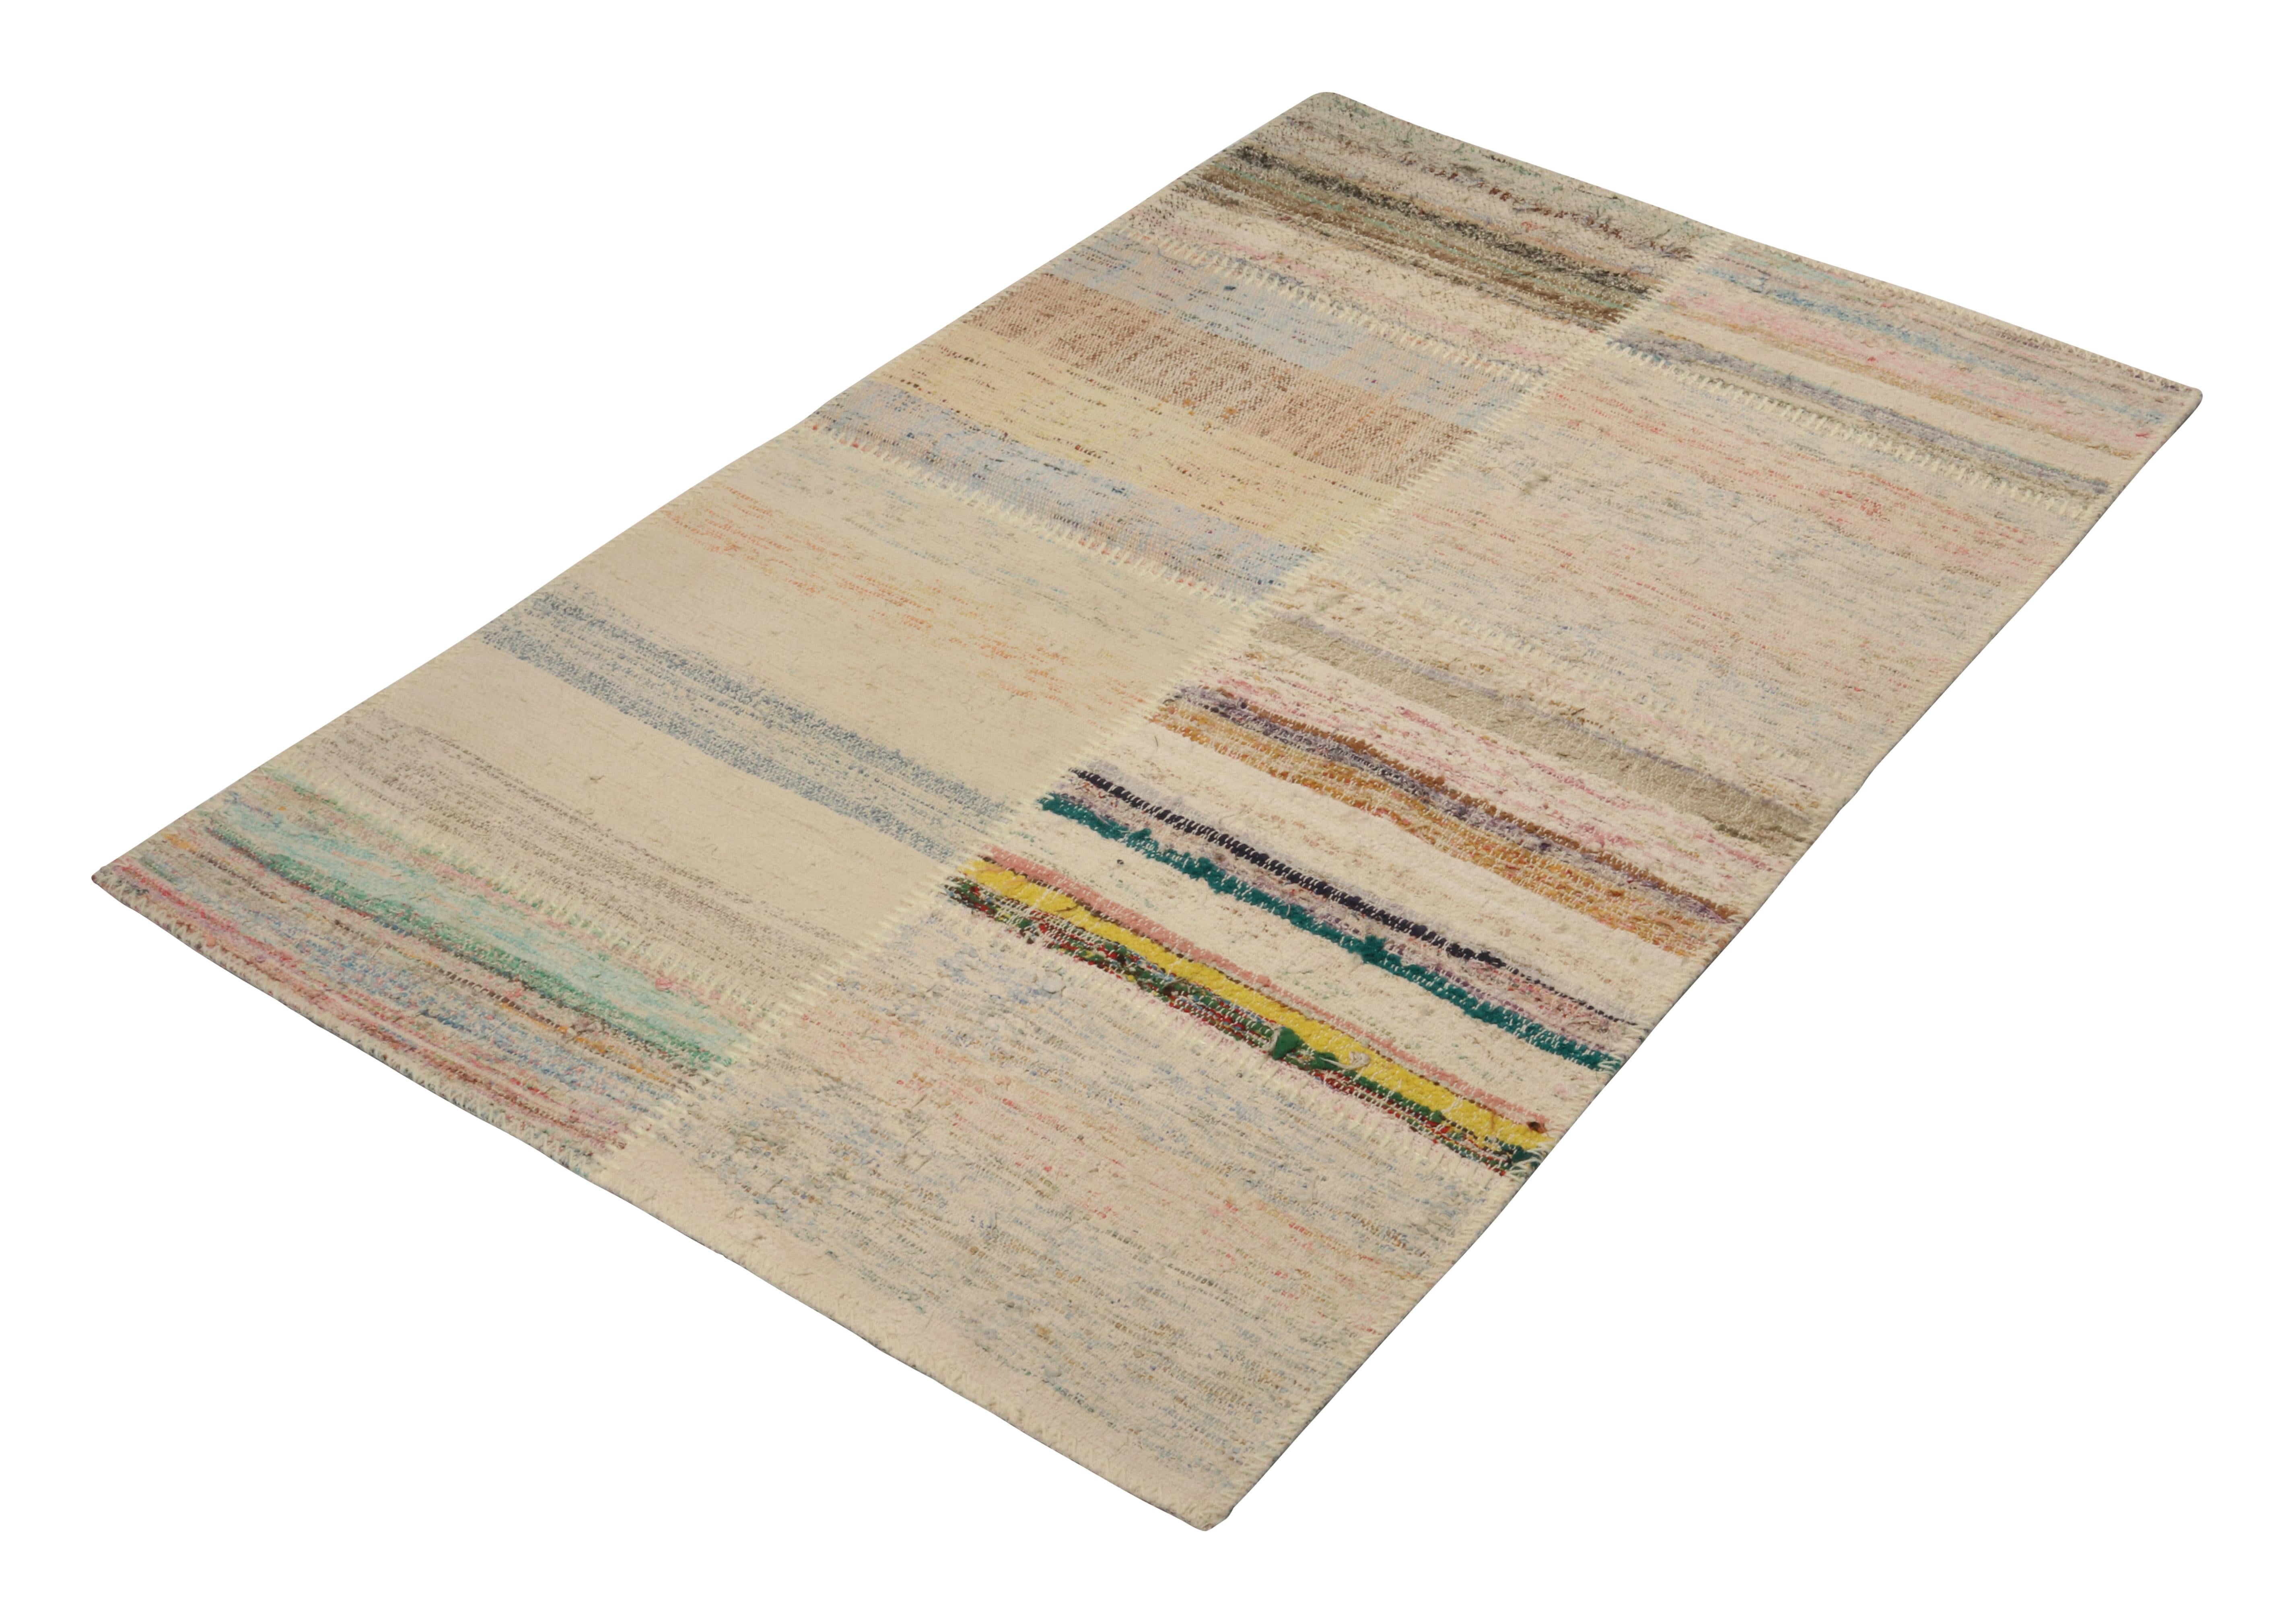 Handwoven in wool, Rug & Kilim presents a 3x5 contemporary rug from their innovative new patchwork kilim collection. 

On the Design: 

This flat weave technique repurposes vintage yarns in polychromatic stripes and striae, achieving a playful